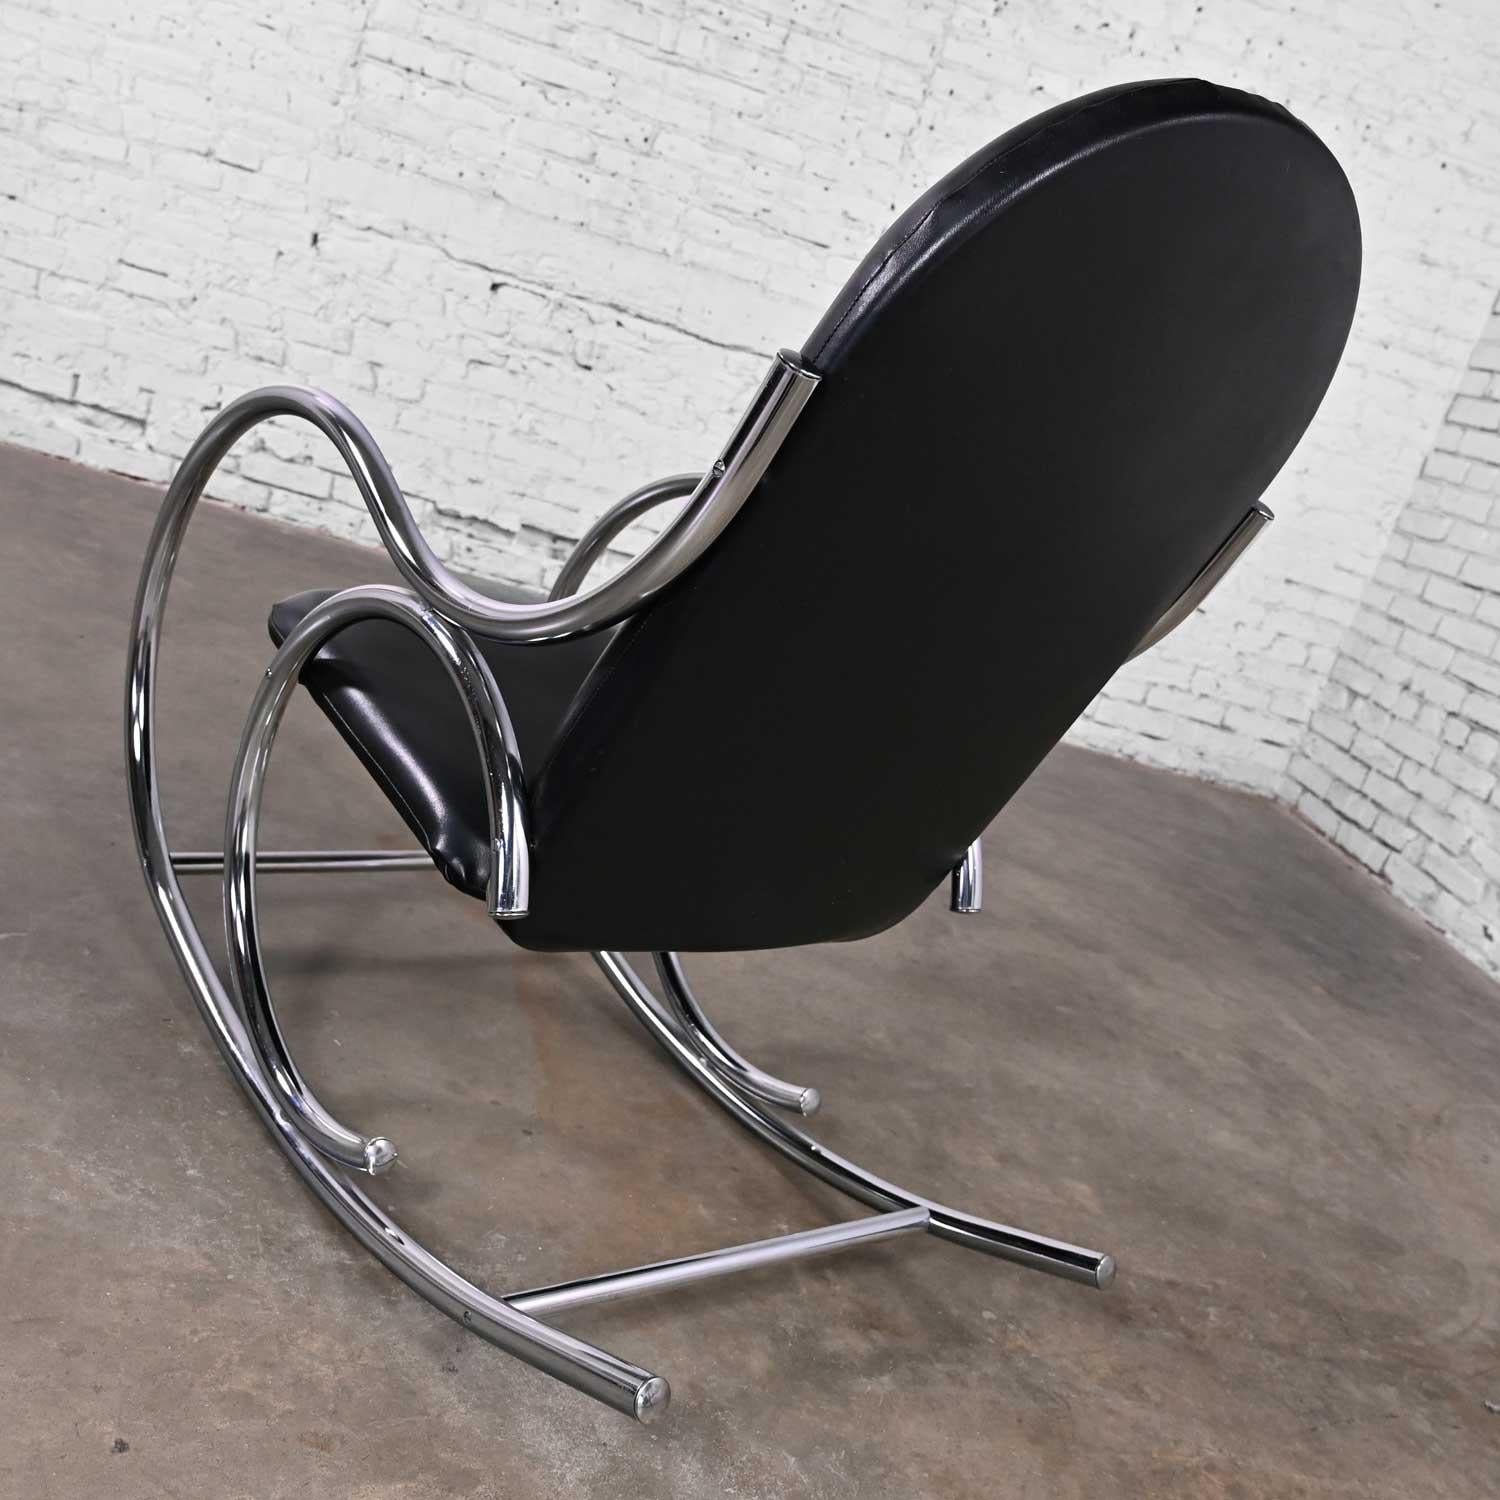 Bauhaus Style Black Vinyl & Chrome Bentwood Style Rocking Chair After Thonet In Good Condition For Sale In Topeka, KS